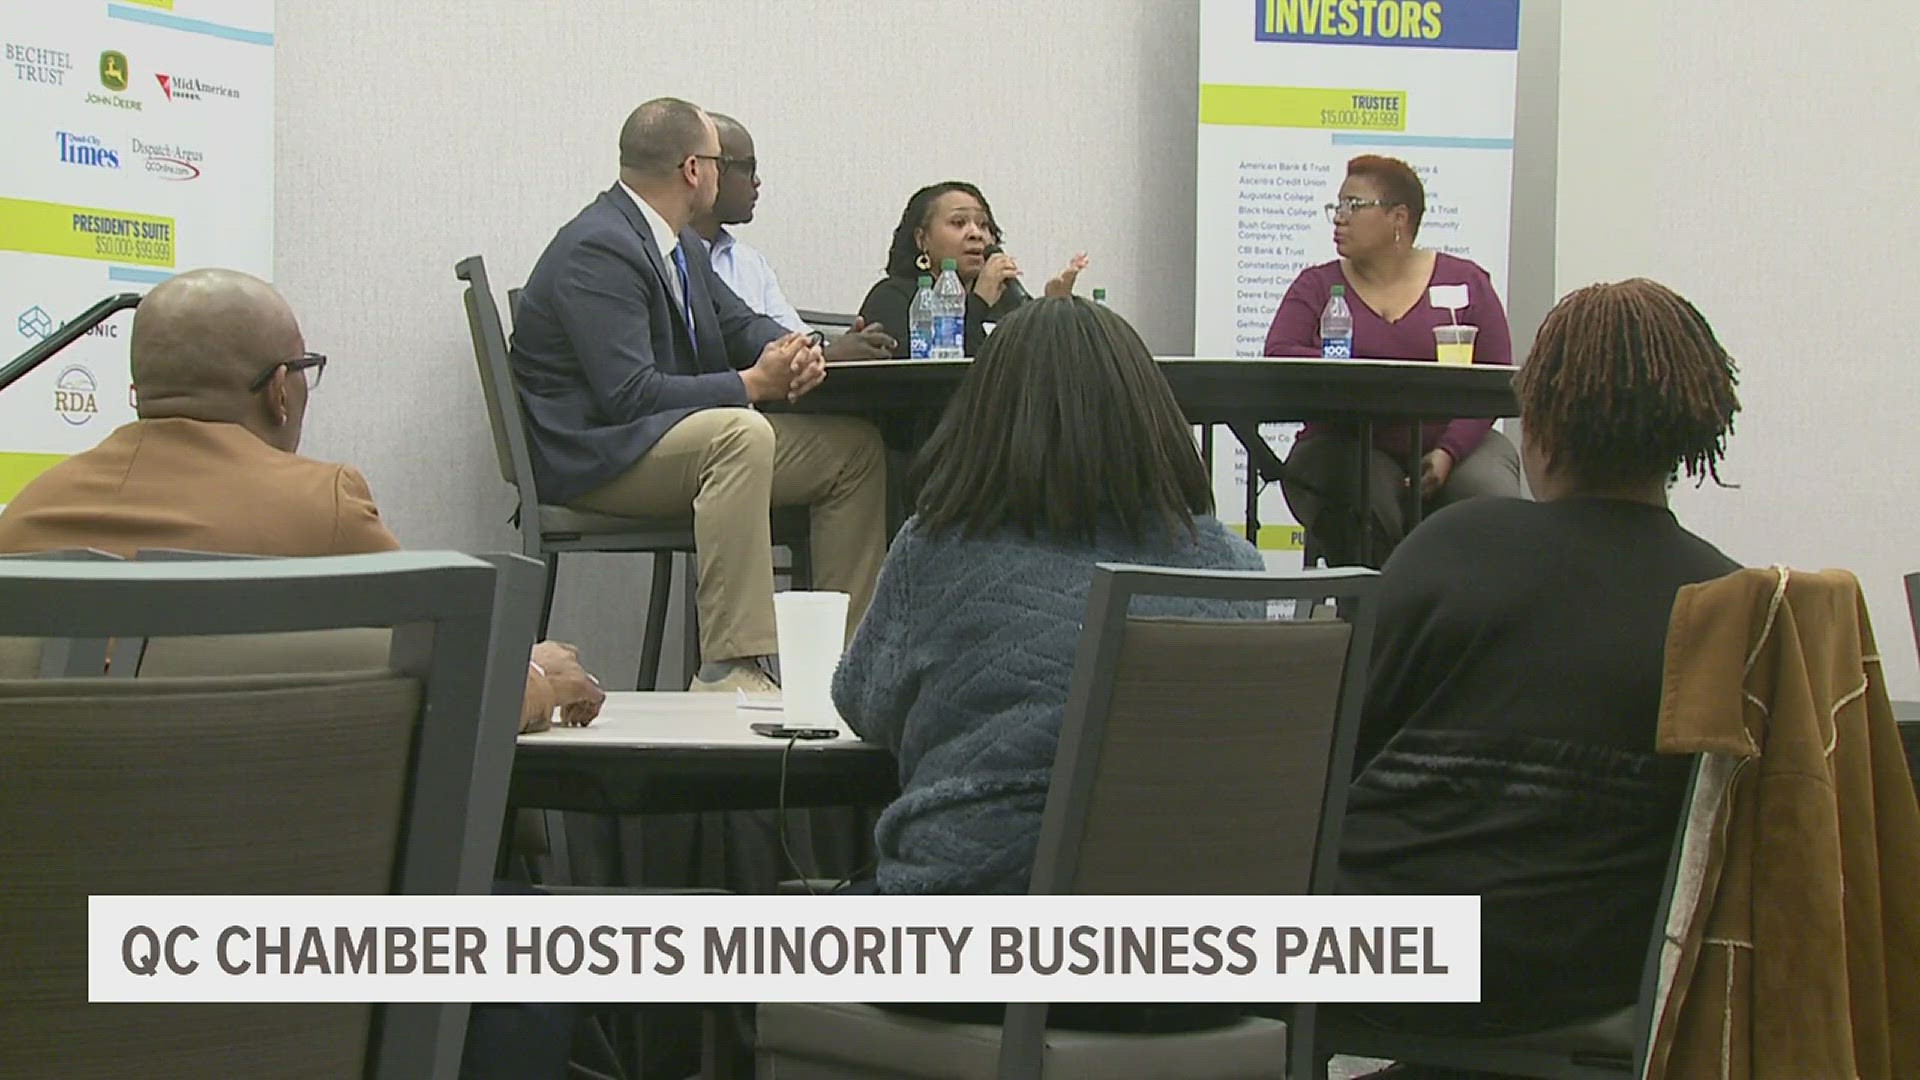 "One of the things that business owners say they really need is an opportunity to network," Quad Cities Chamber talent and inclusion manager Brandy Poston says.